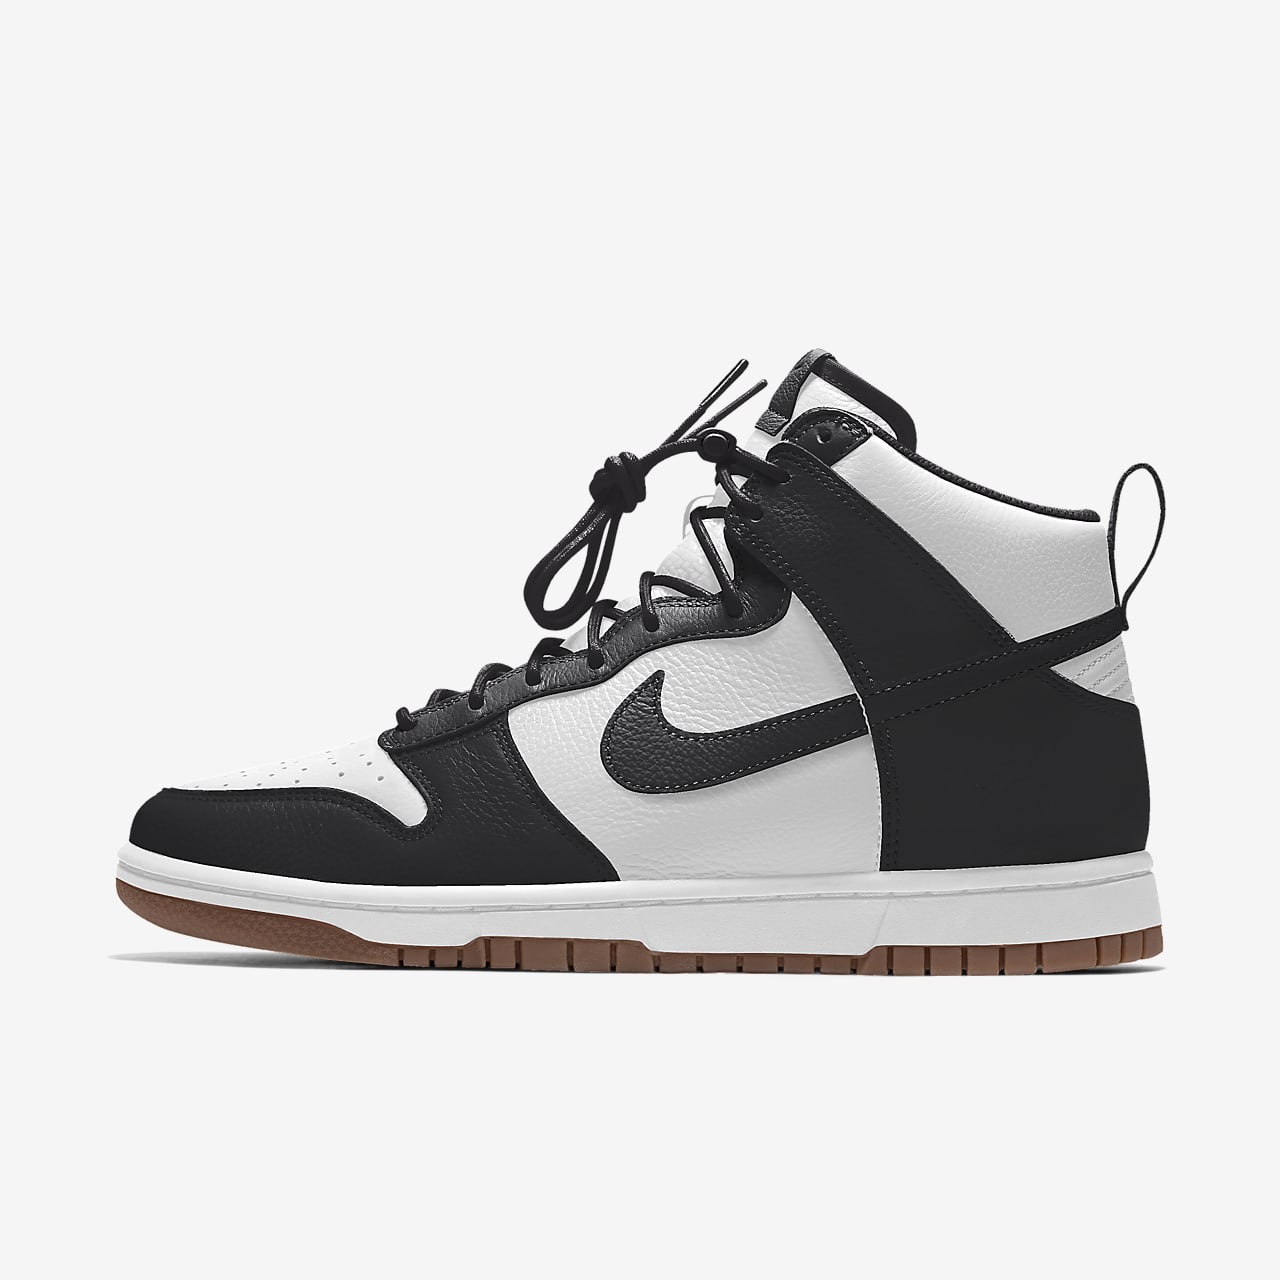 Chaussure personnalisable Nike Dunk High By You pour homme